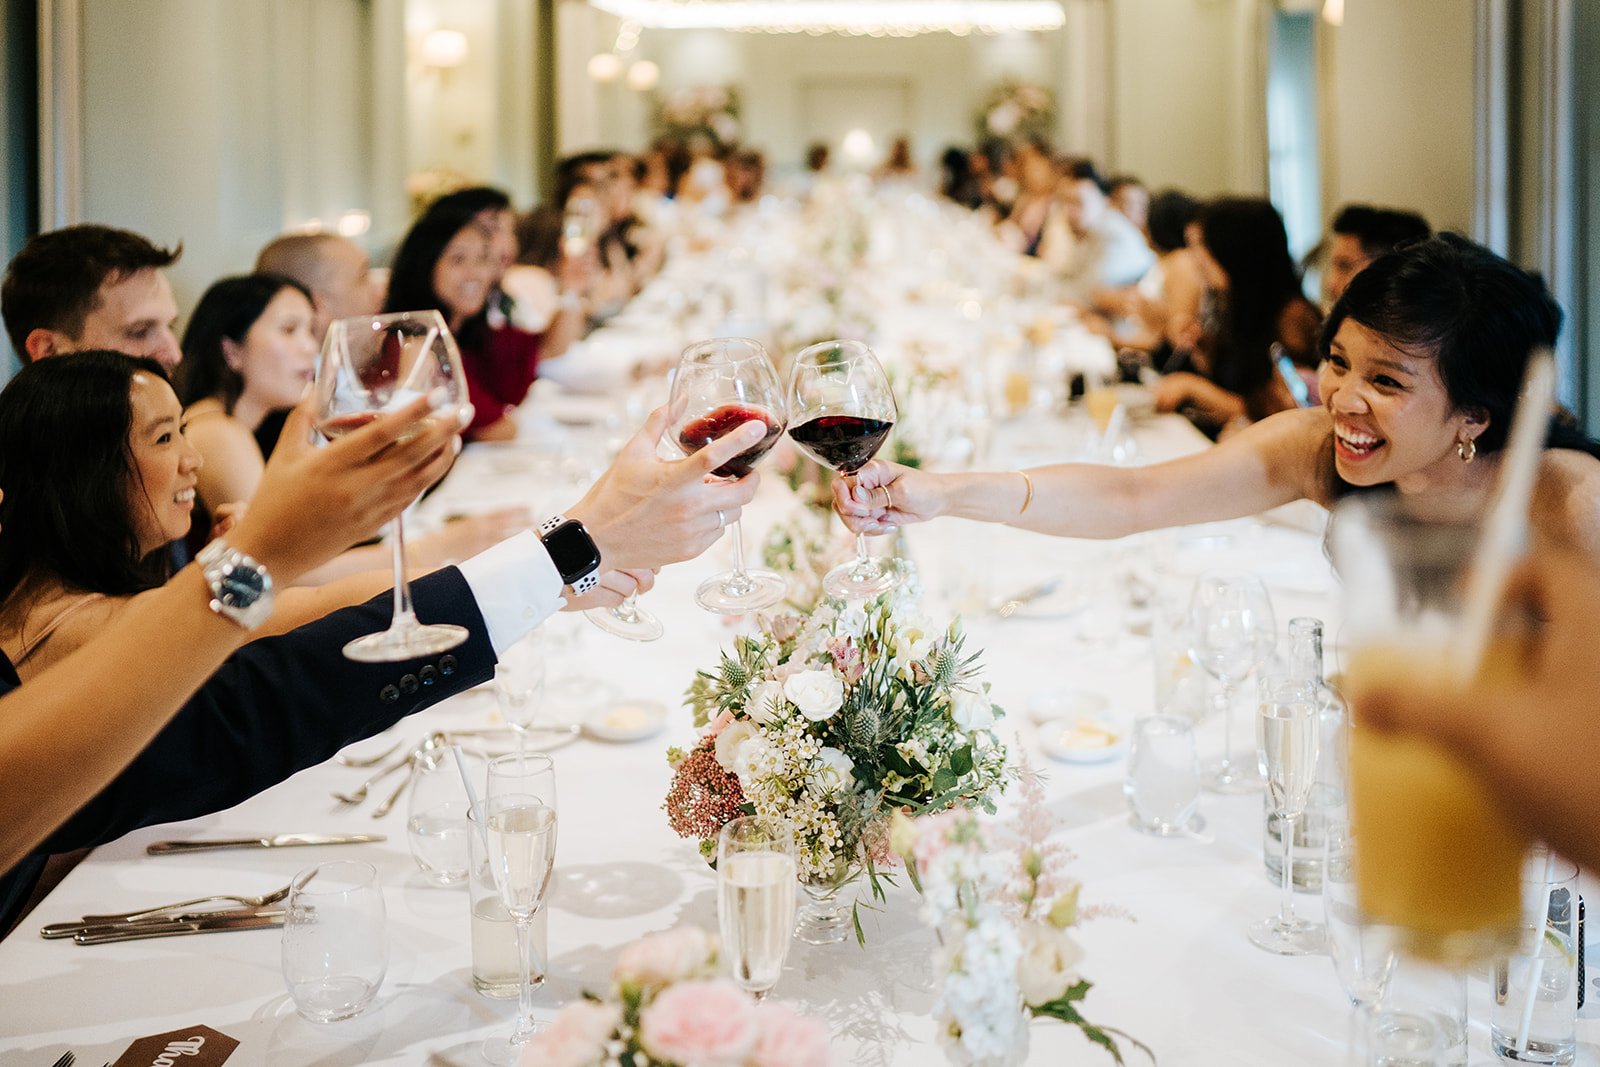 Atmospheric shot of glasses clinking during wedding toasts